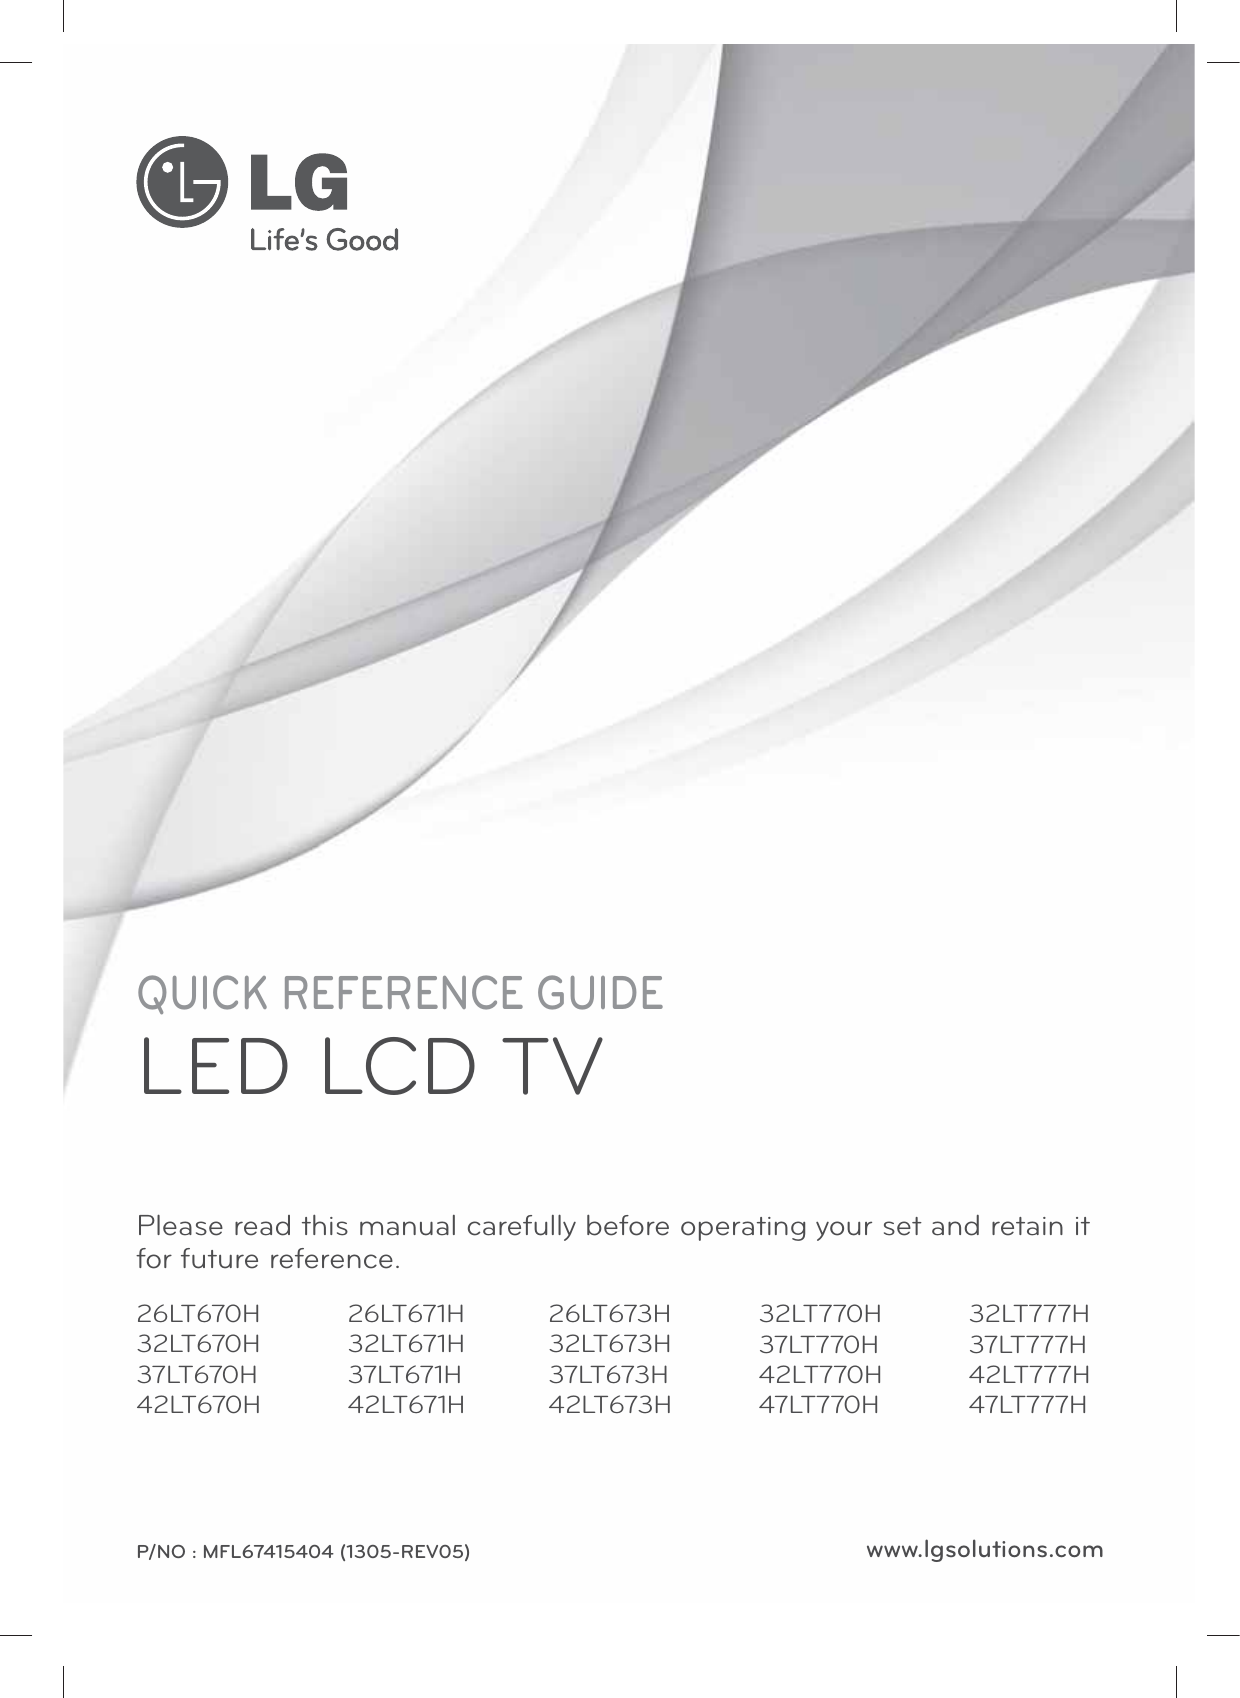 www.lgsolutions.comQUICK REFERENCE GUIDELED LCD TVPlease read this manual carefully before operating your set and retain it for future reference.P/NO : MFL67415404 (1305-REV05)26LT670H32LT670H37LT670H42LT670H26LT673H32LT673H37LT673H42LT673H26LT671H32LT671H37LT671H42LT671H32LT770H37LT770H42LT770H47LT770H32LT777H37LT777H42LT777H47LT777H